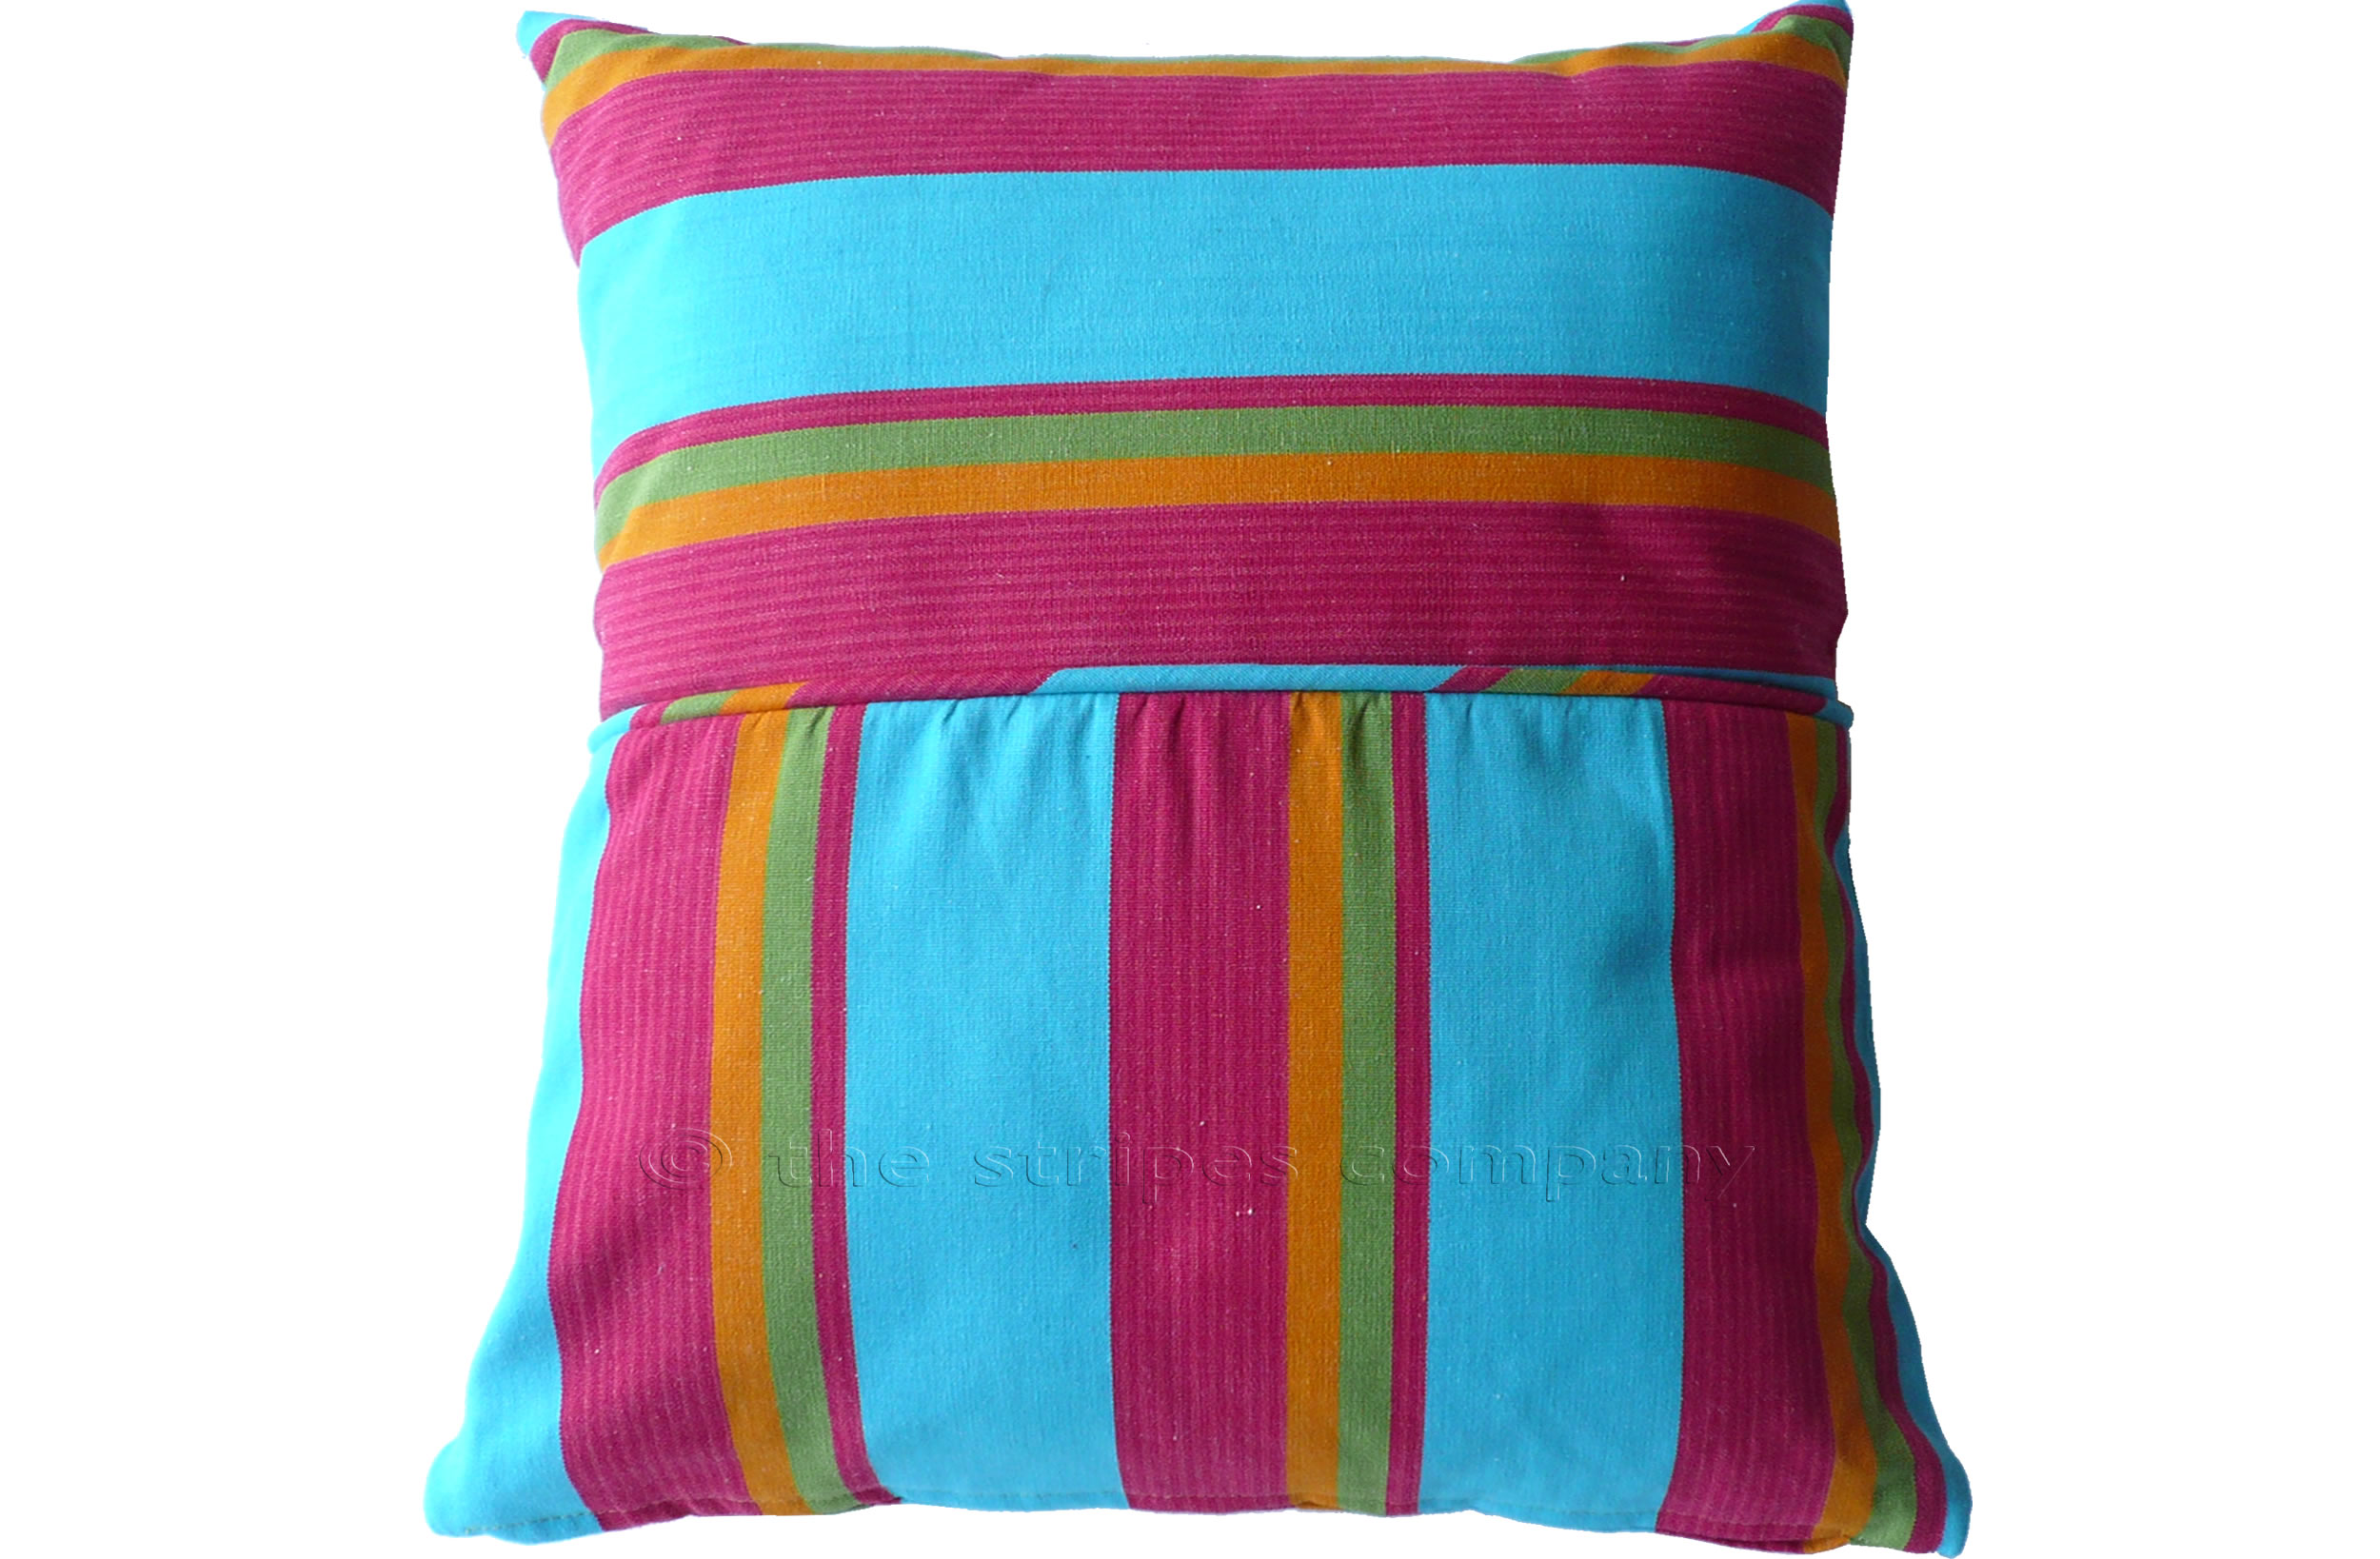 Turquoise Striped Piped Cushions | Square Piped Cushions Fastnet Stripes